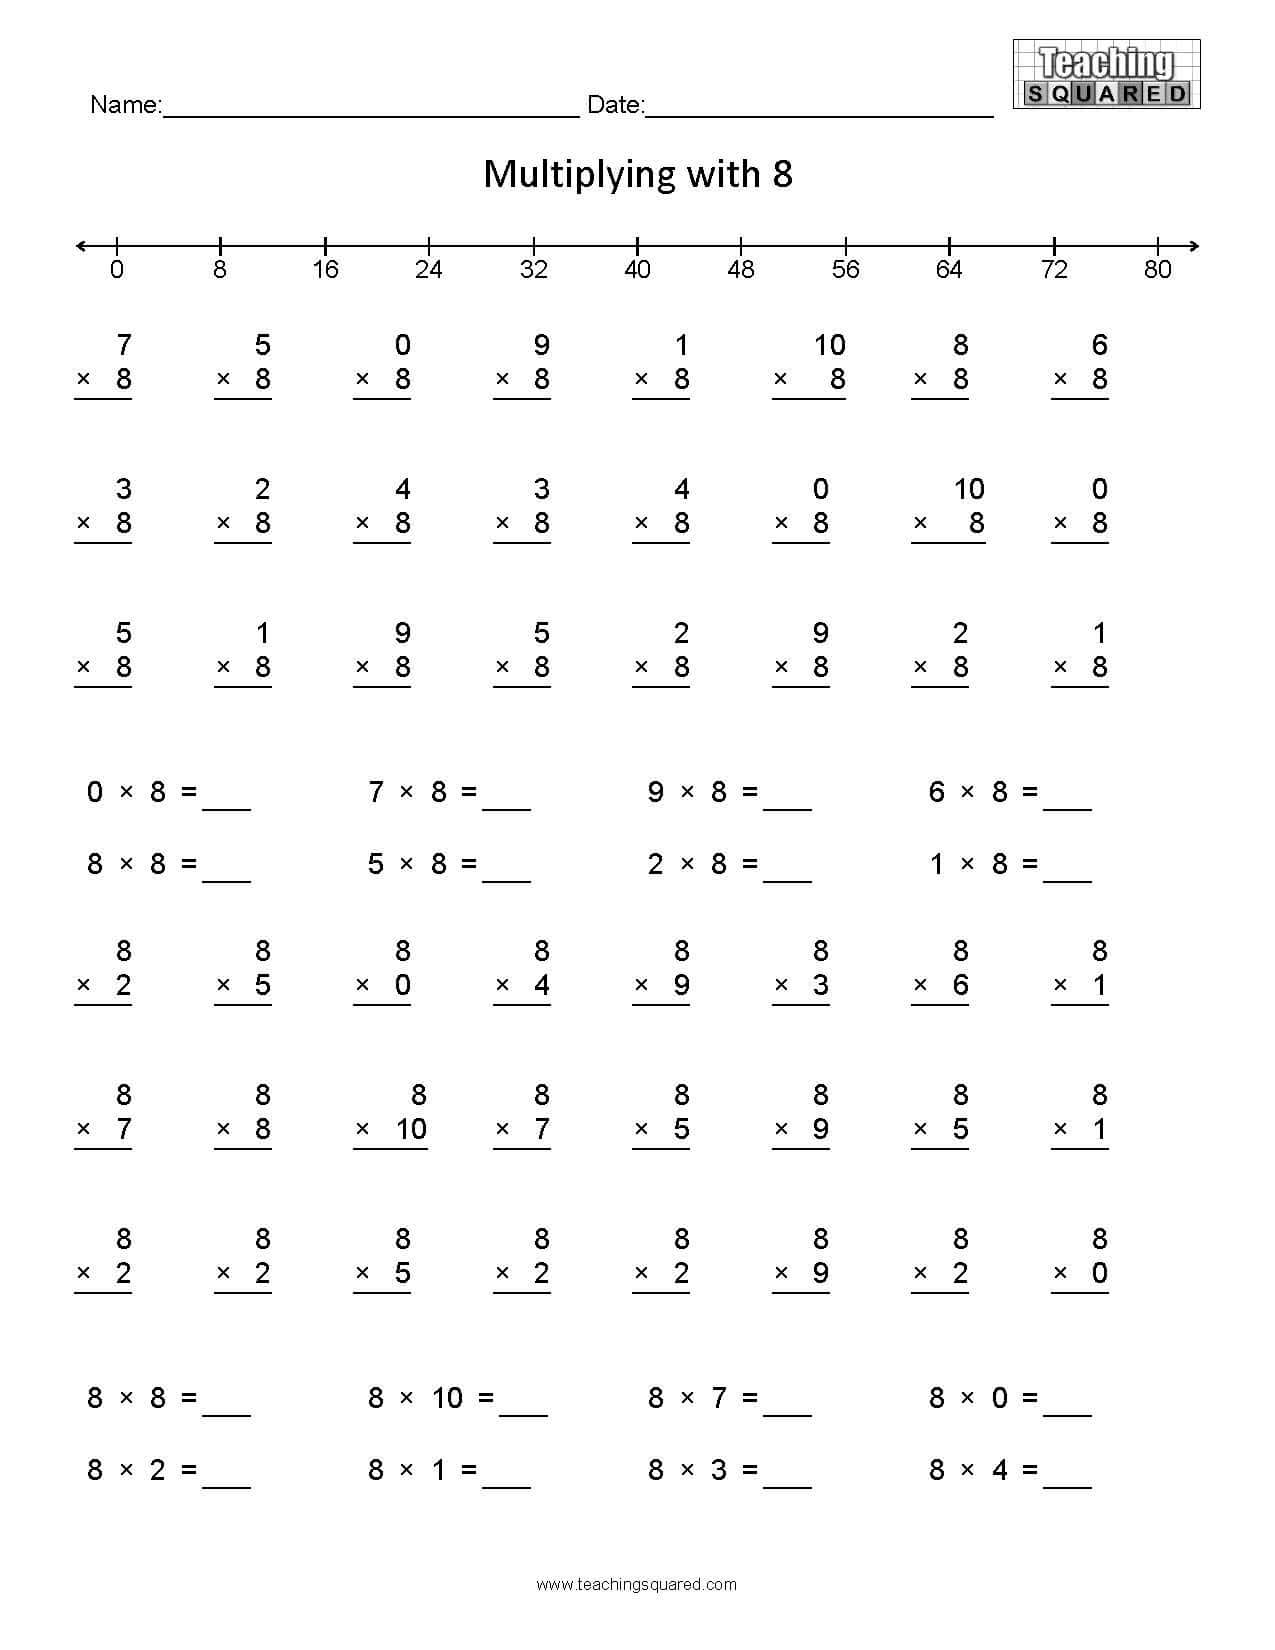 Learning Multiplication- Multiplying by 8 teaching and home school worksheets